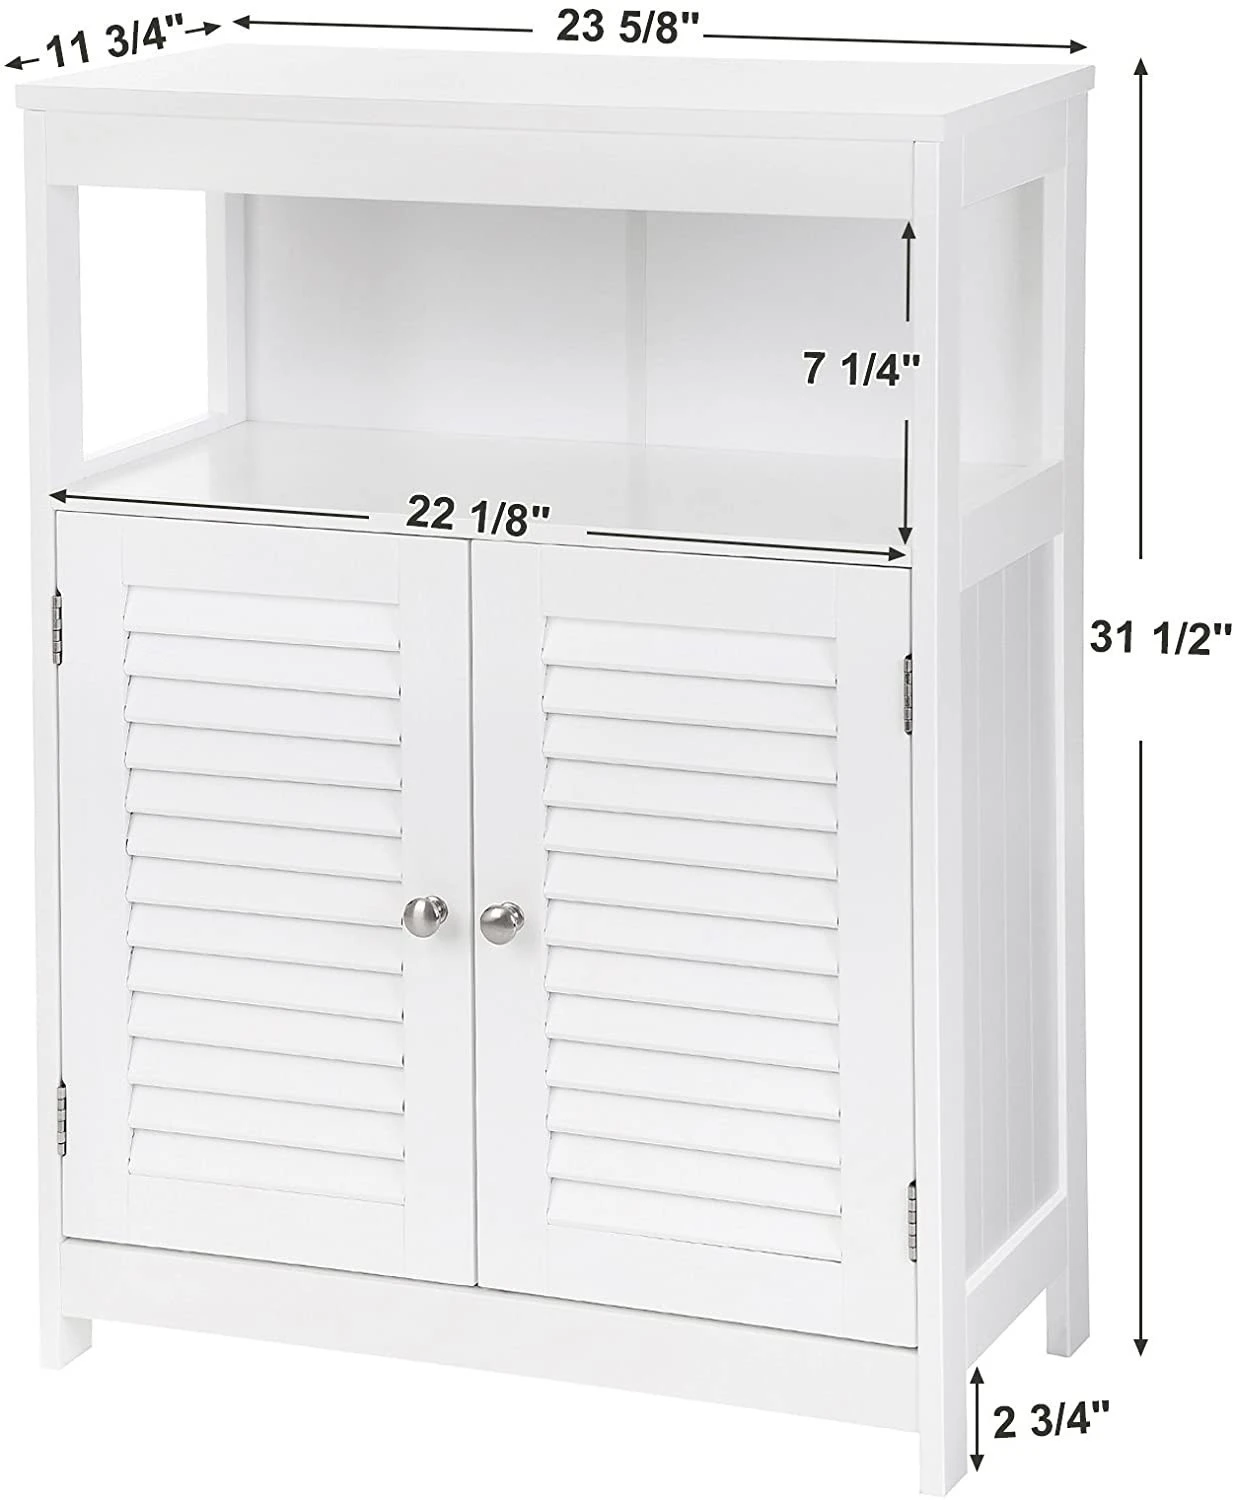 Hot-selling Bathroom Storage Floor Cabinet Free Standing with Double Shutter Door and Adjustable Shelf White